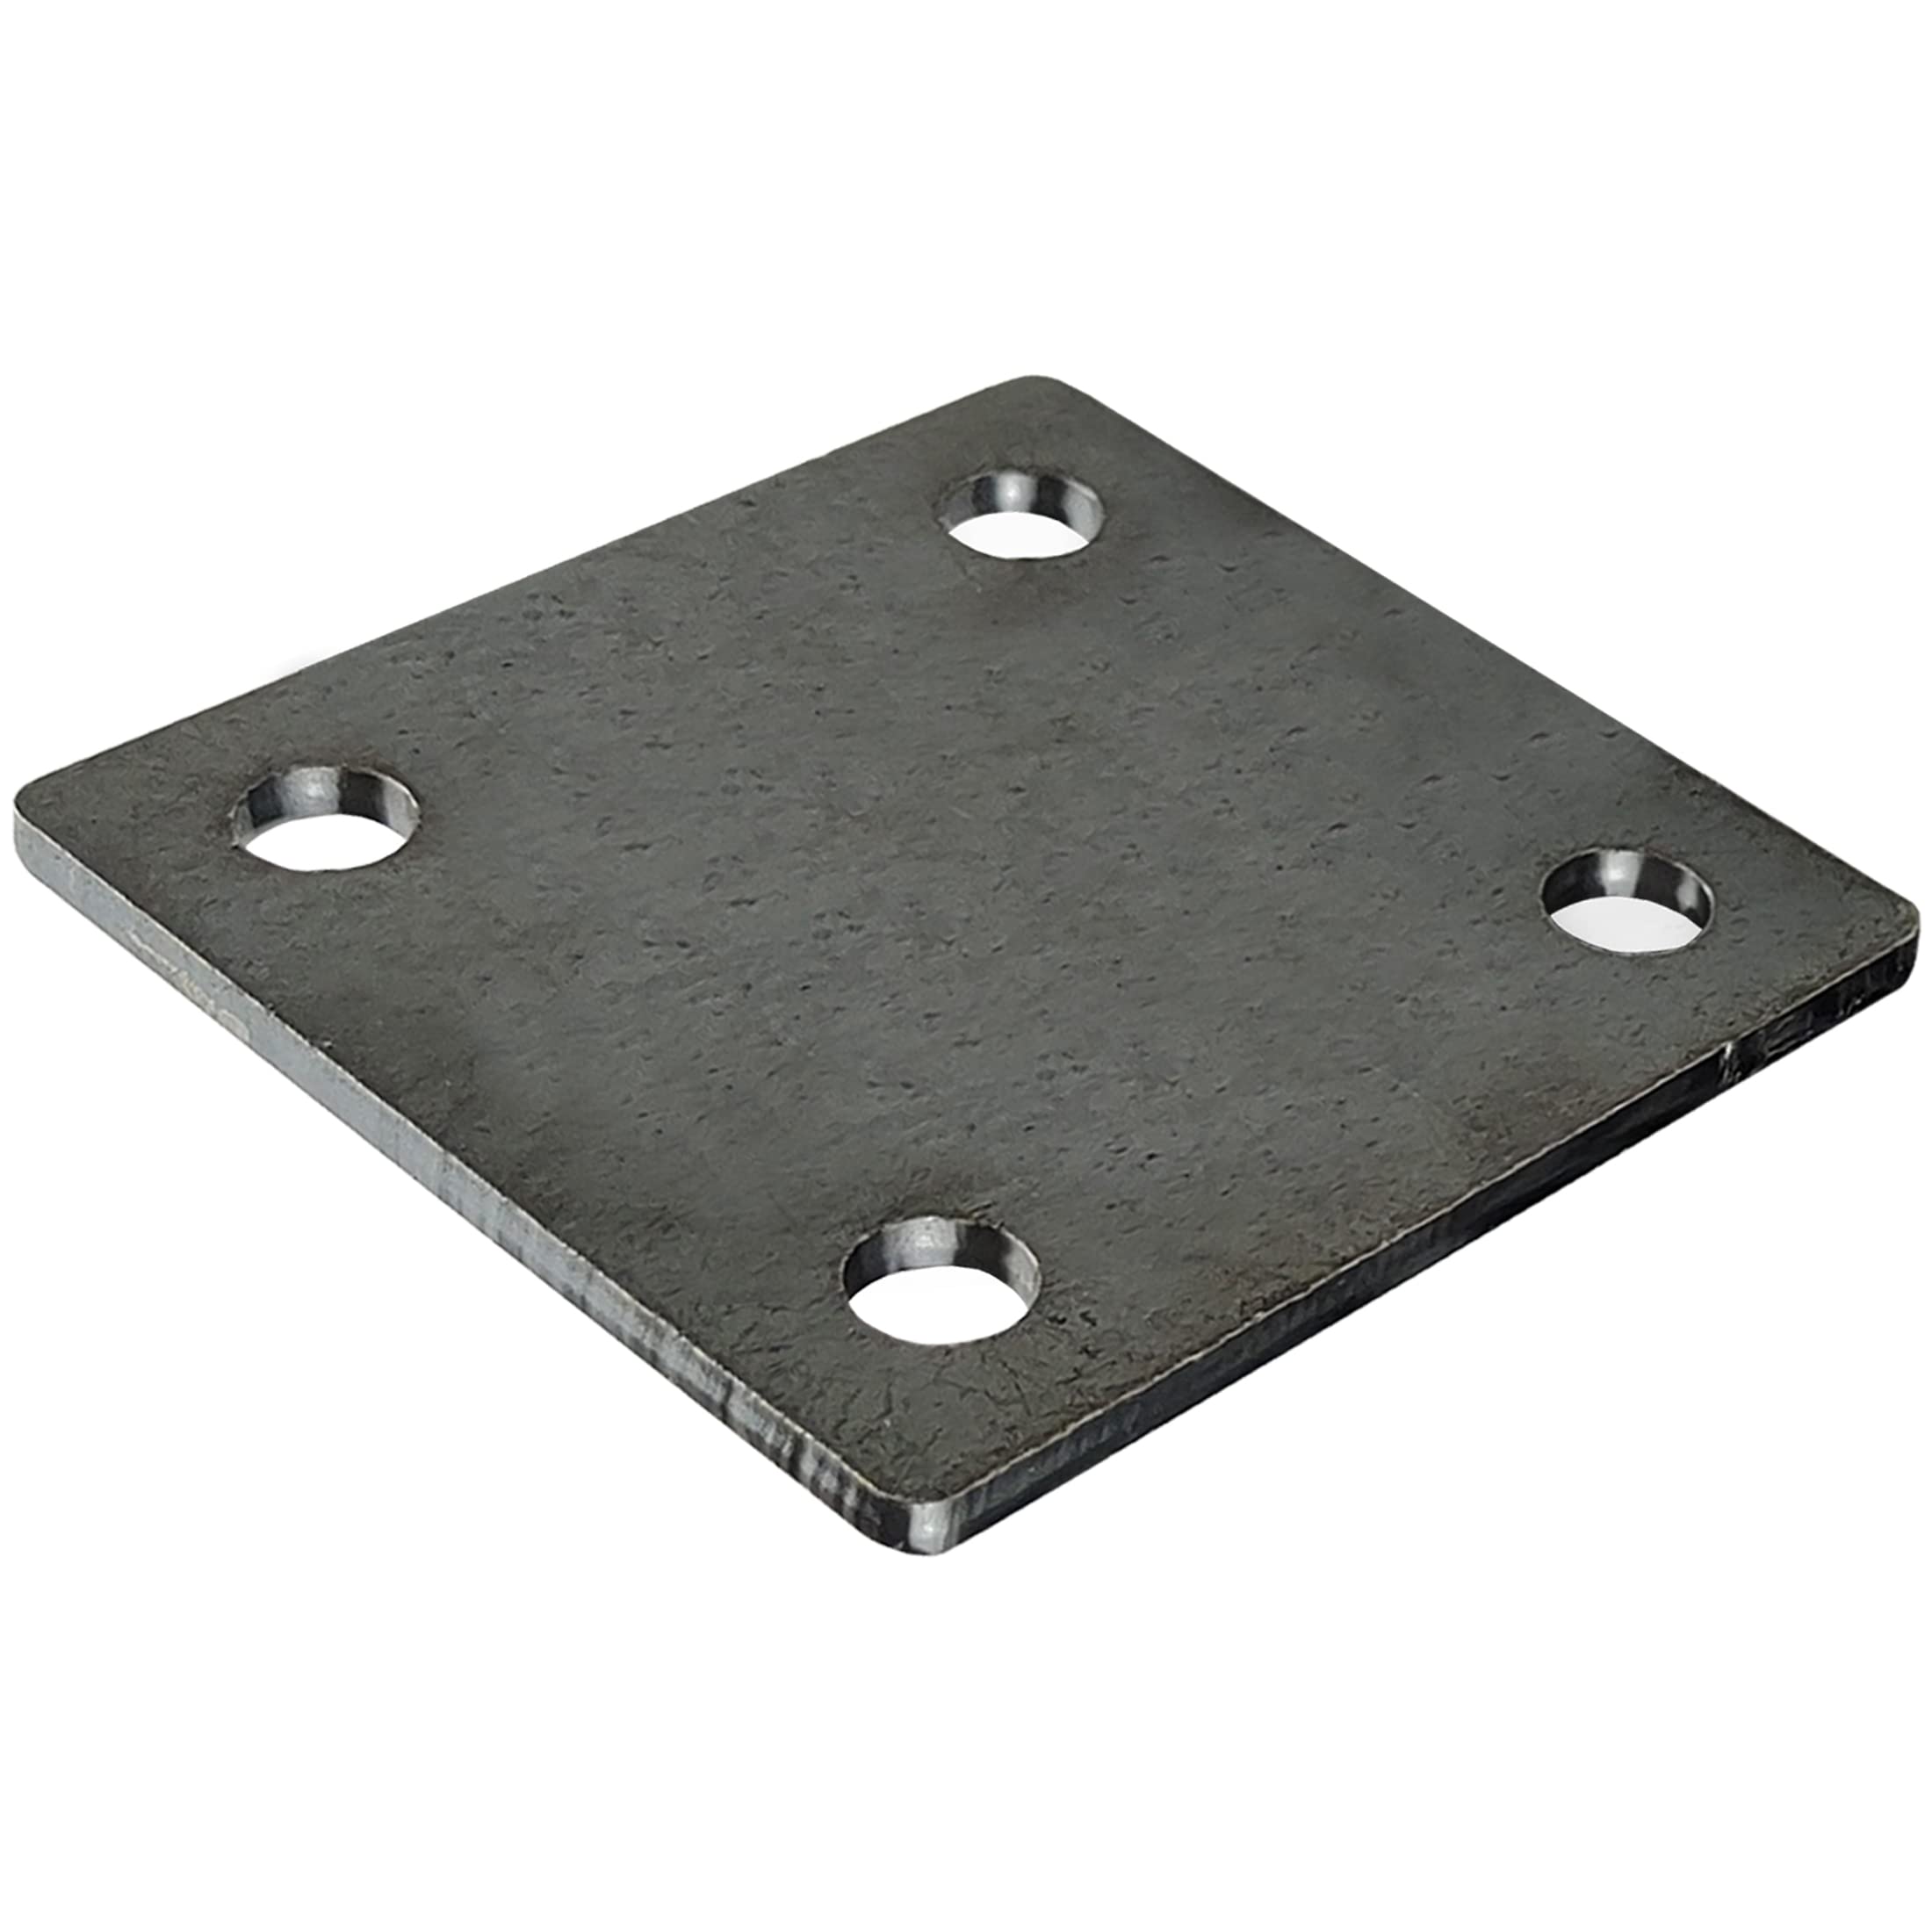 Jikacok 3-inch Steel Plate with Holes. 4 PCS 3x3Steel Plate Made from  Premium 9 Gauge A36 Hot Rolled Mild Steel. Laser Cut Metal Plate with  Smooth